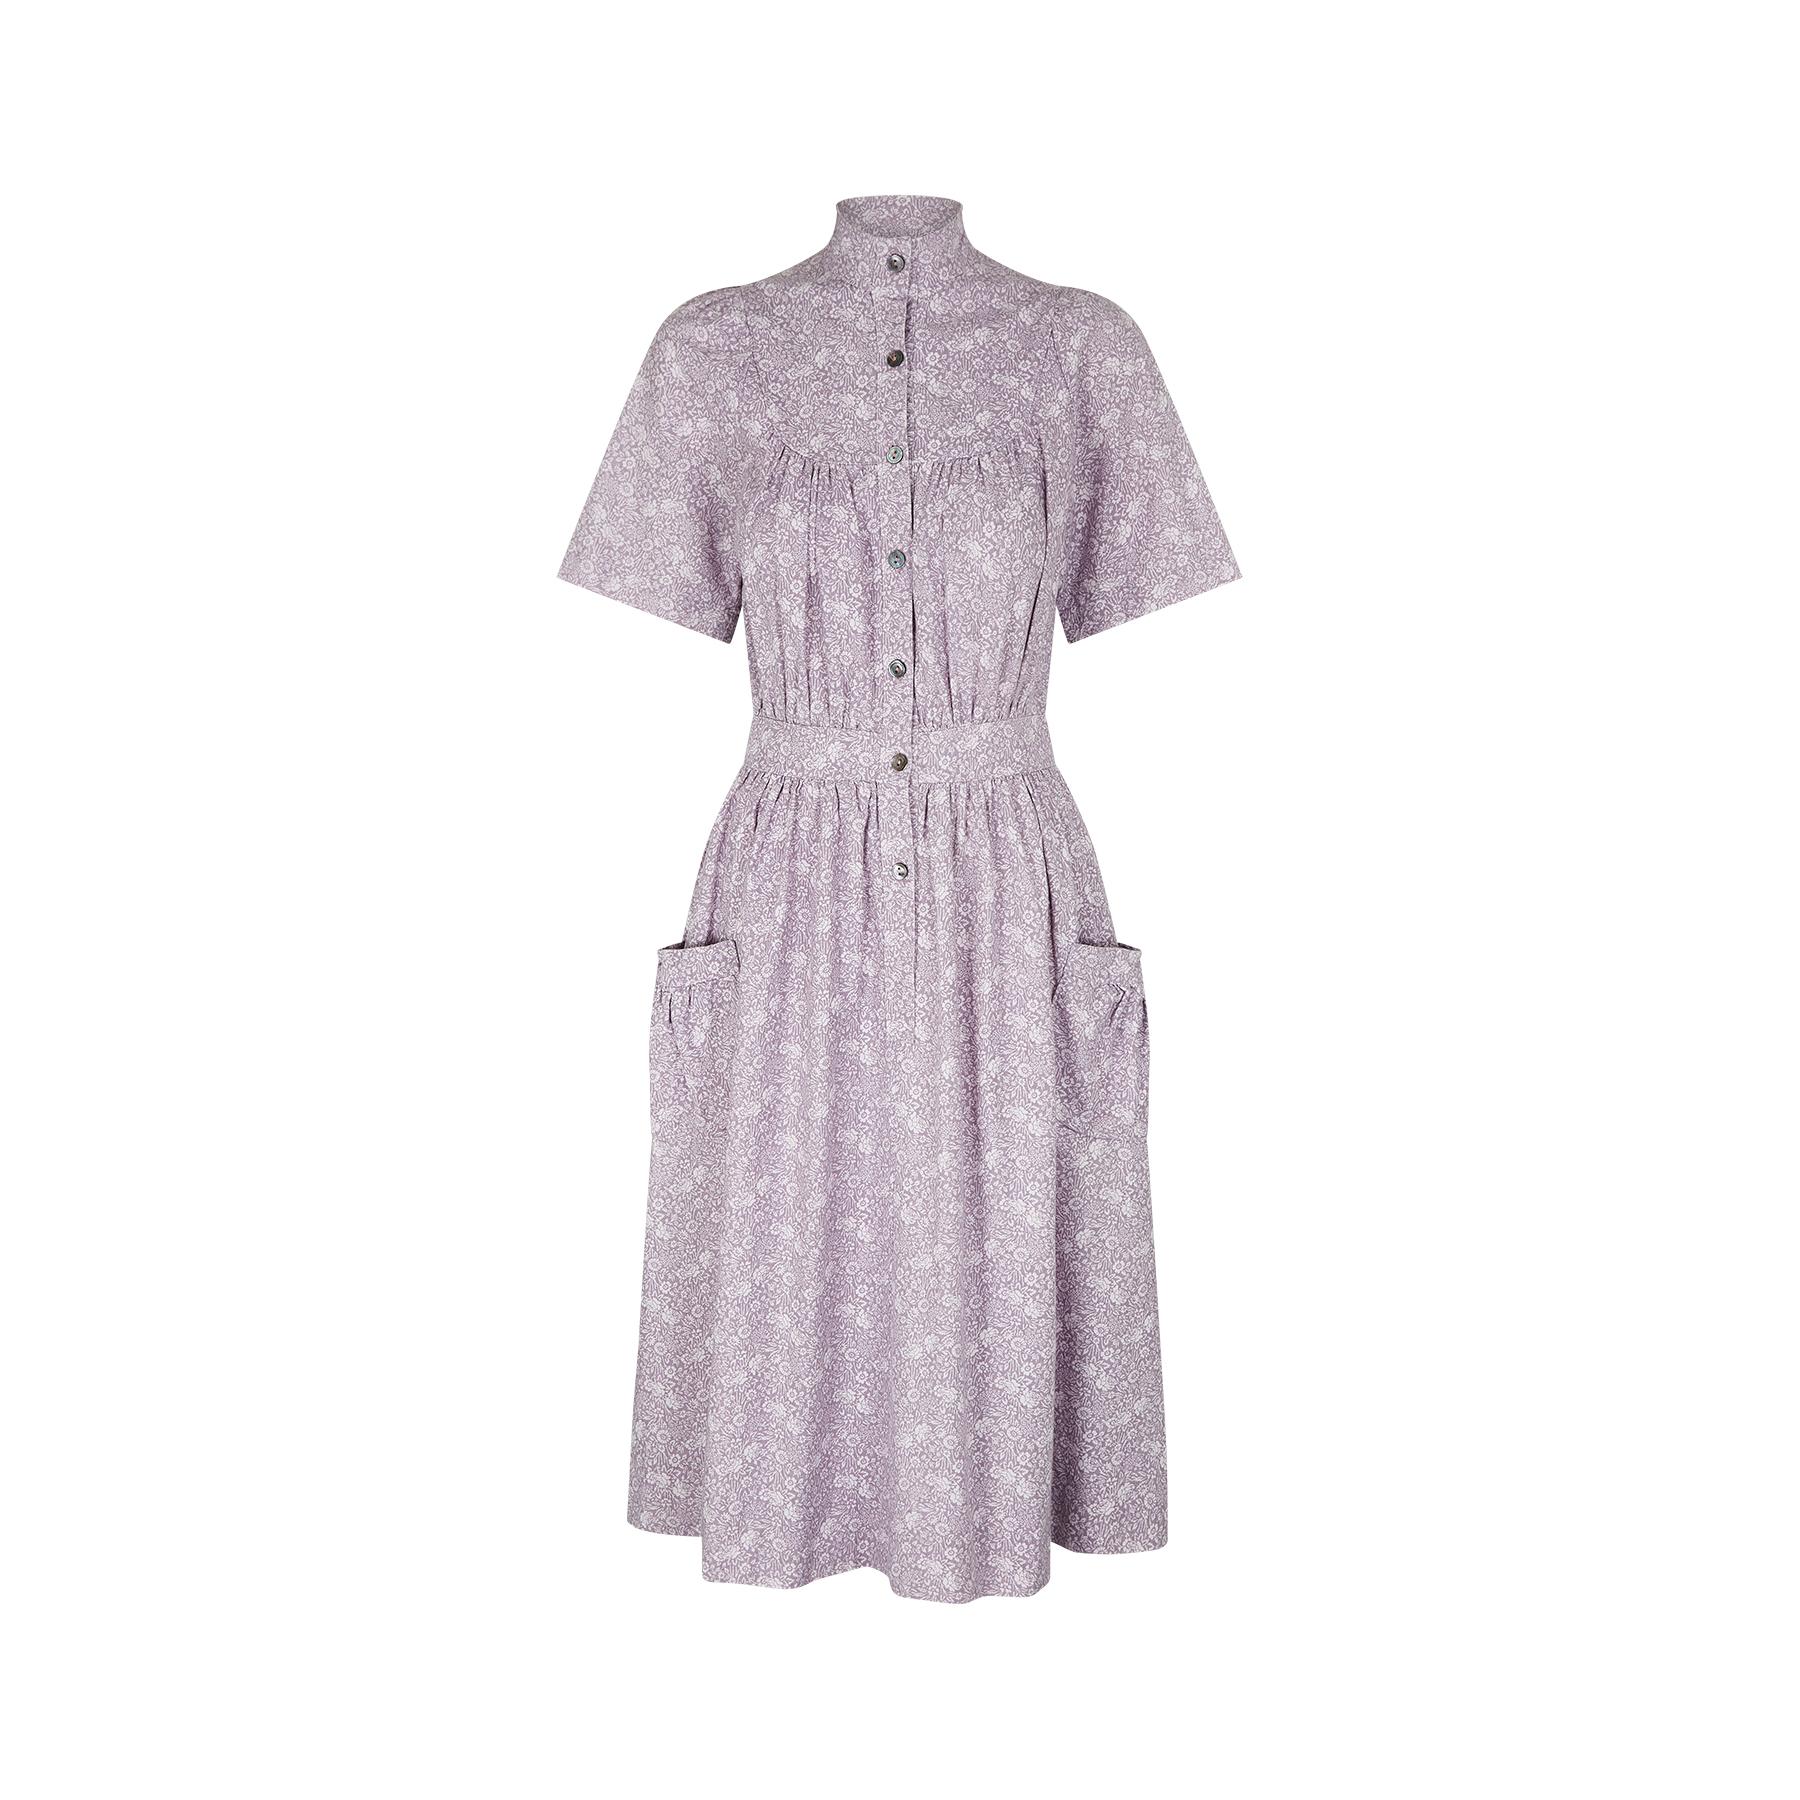 Classic floral cotton shirtwaister dress by Laura Ashley with the early 1970s Made in Wales label. The print has an intricate repeat floral pattern featuring an array of native British flowers including roses, chrysanthemums and pansies in a mauve